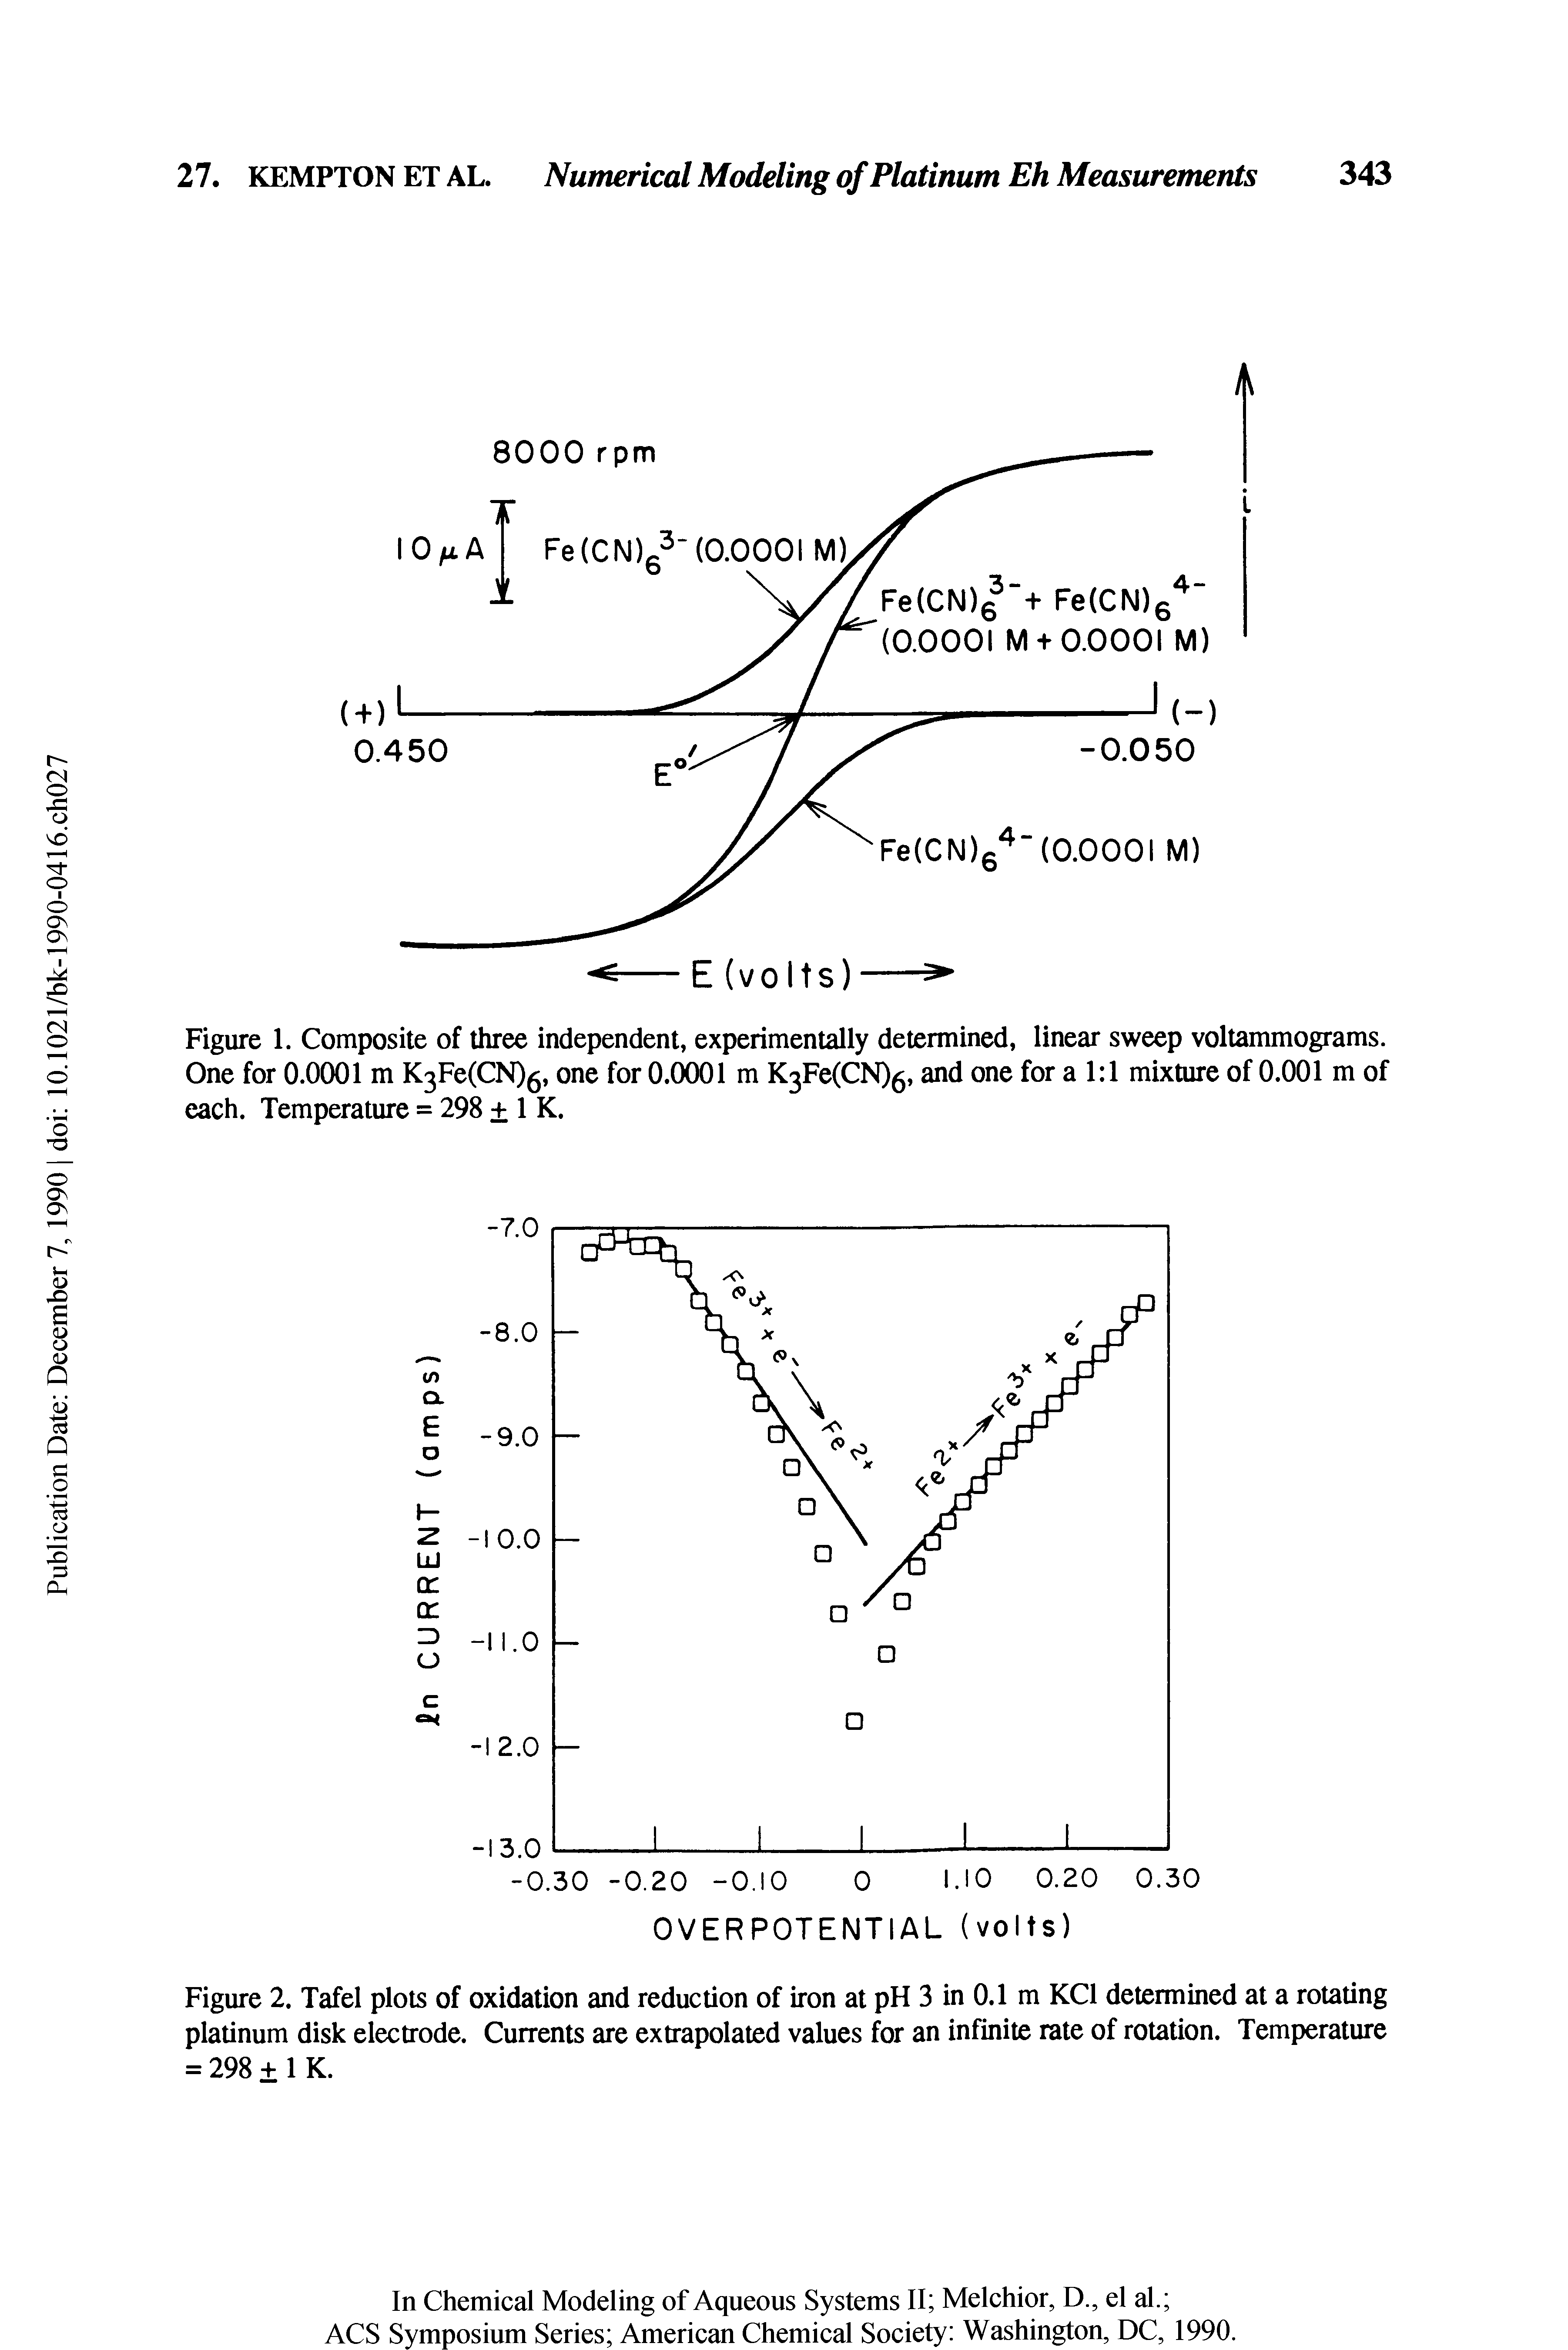 Figure 2. Tafel plots of oxidation and reduction of iron at pH 3 in 0.1 m KCl determined at a rotating platinum disk electrode. Currents are extrapolated values for an infinite rate of rotation. Temperature = 298 1 K.